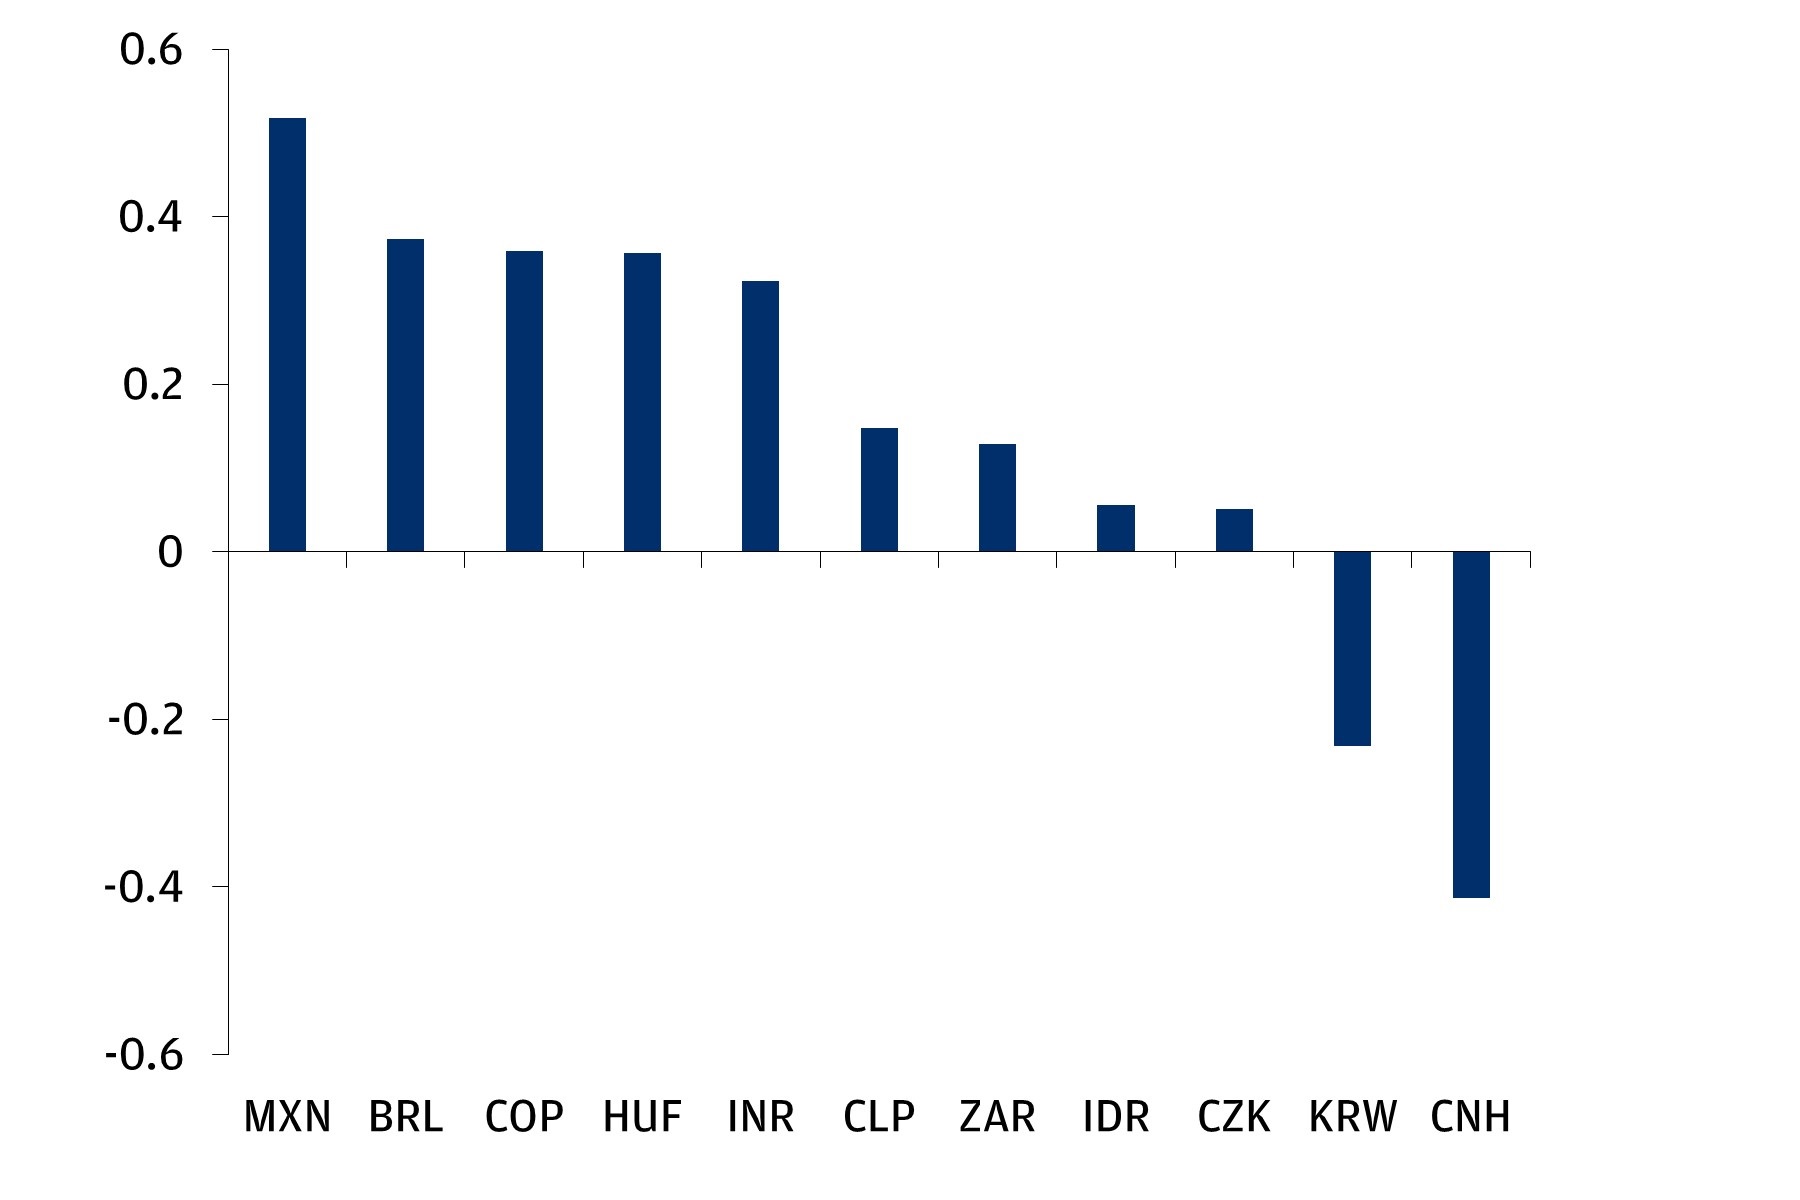 1-year carry-to-volatility for the Mexican Peso, Brazilian Real, Colombian Peso, Hungarian Forint, Indian Rupee, Chilean Peso, South African Rand, Indonesian Rupiah, Czech Koruna, South Korean Won, and China Offshore Spot